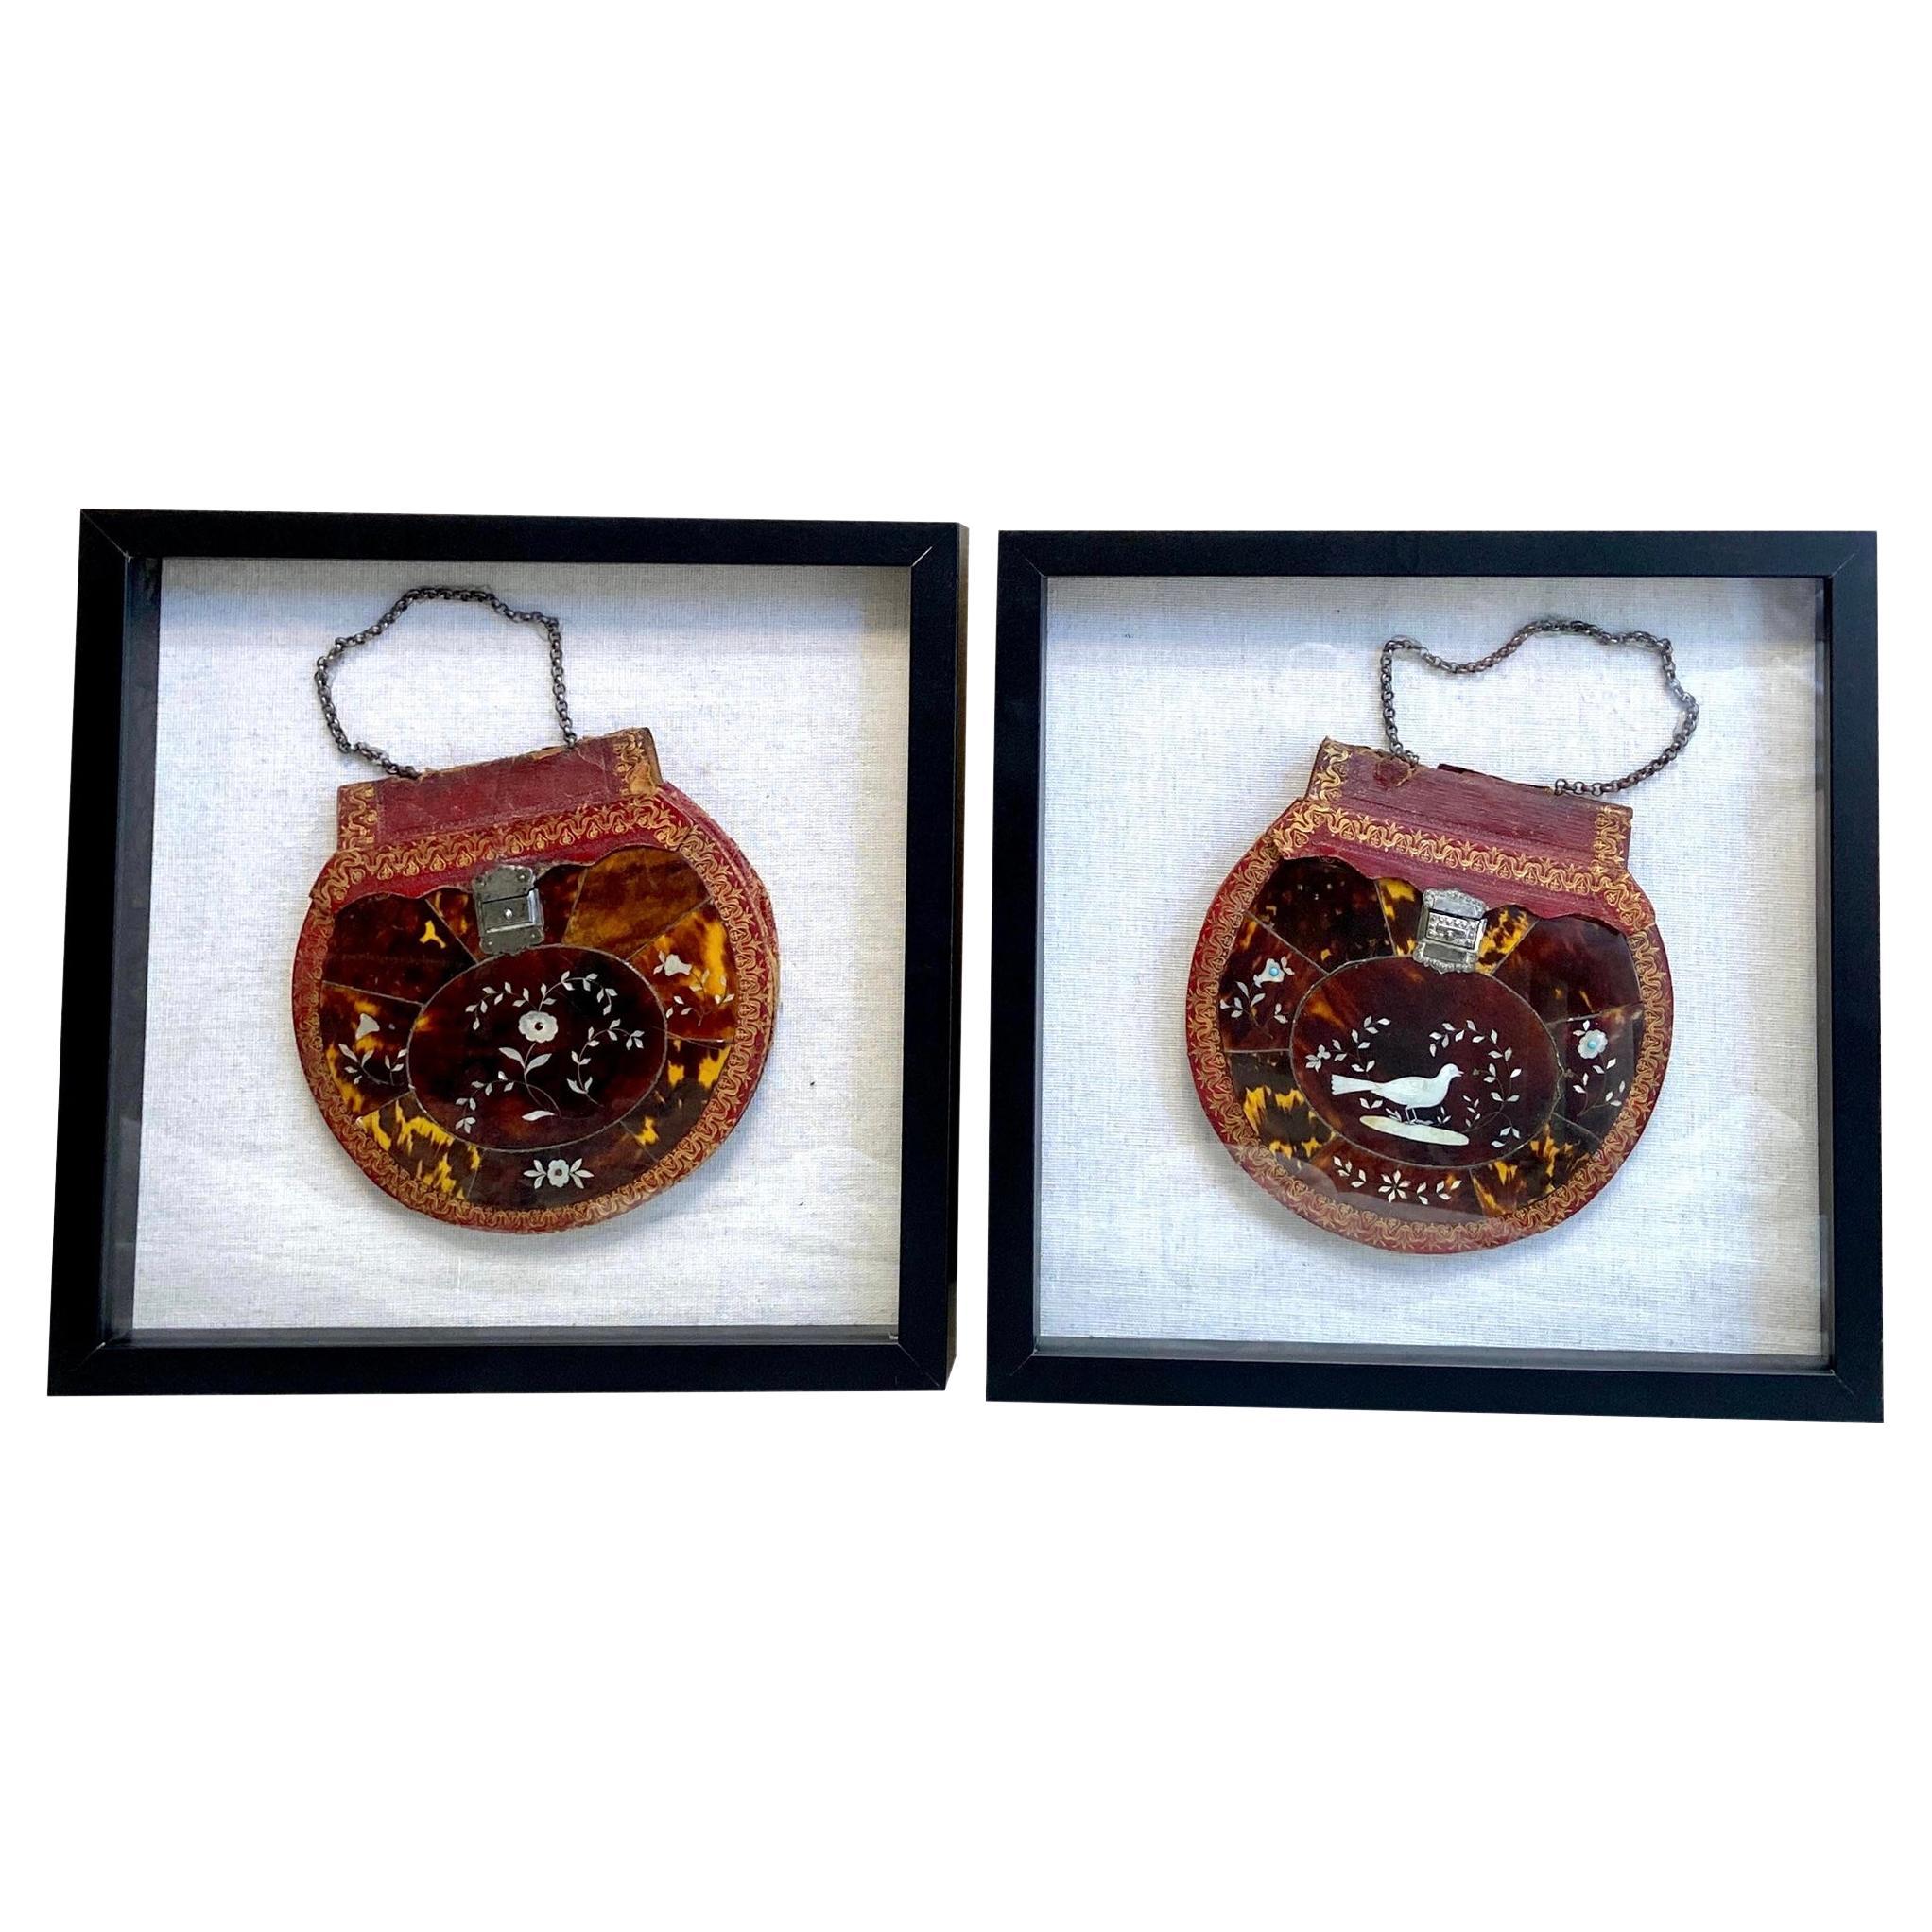 Turtle Shell with Mother of Pearl and Silver Inlay Purse Mounted in Shadowboxes